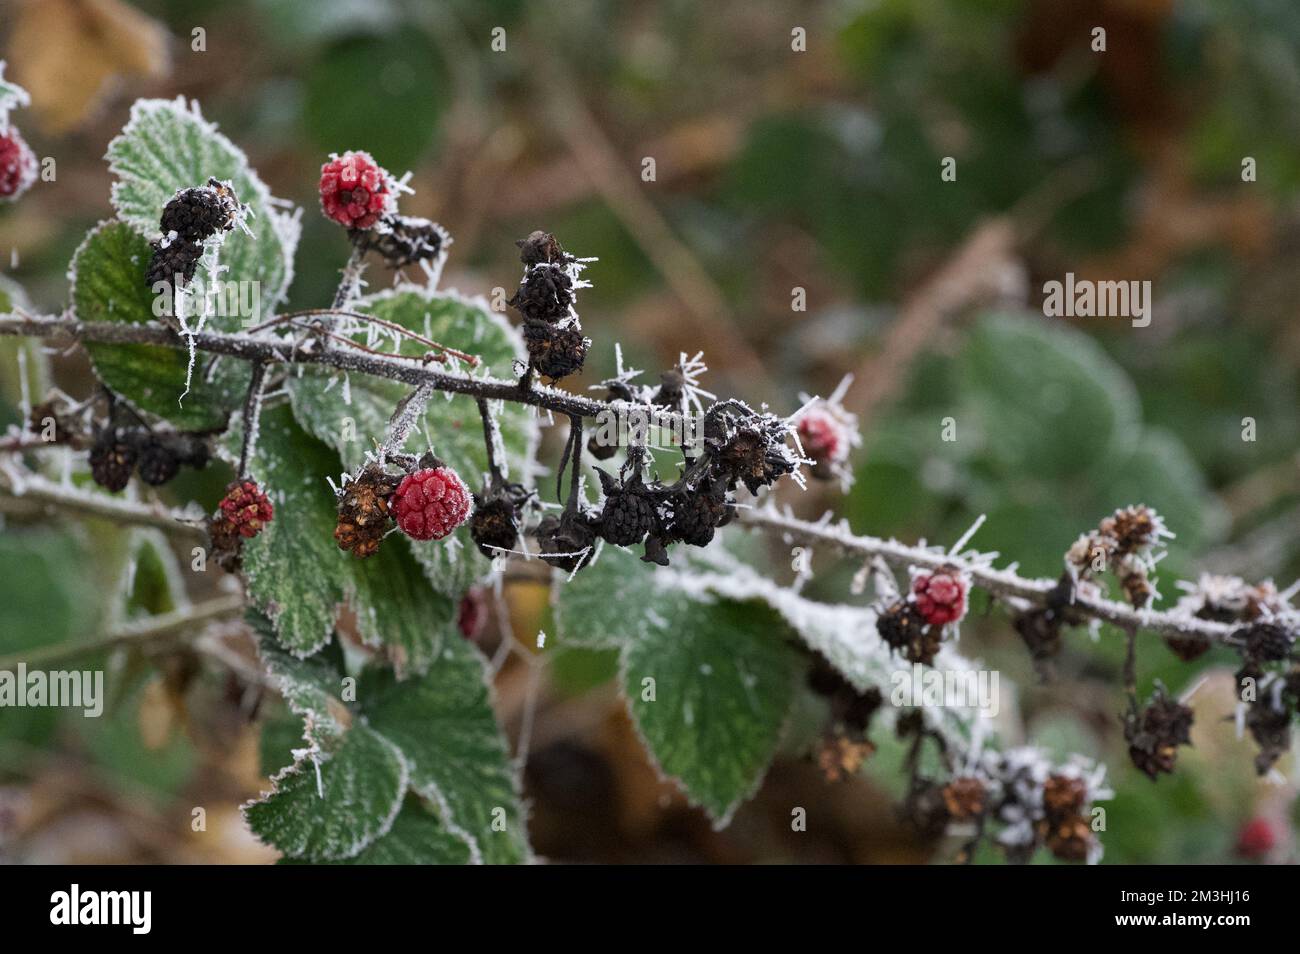 A branch of bramble: blackberry bush (Rubus fruticosus) with leaves and berries - including red fruit - covered in spiky white icicles from a heavy wi Stock Photo